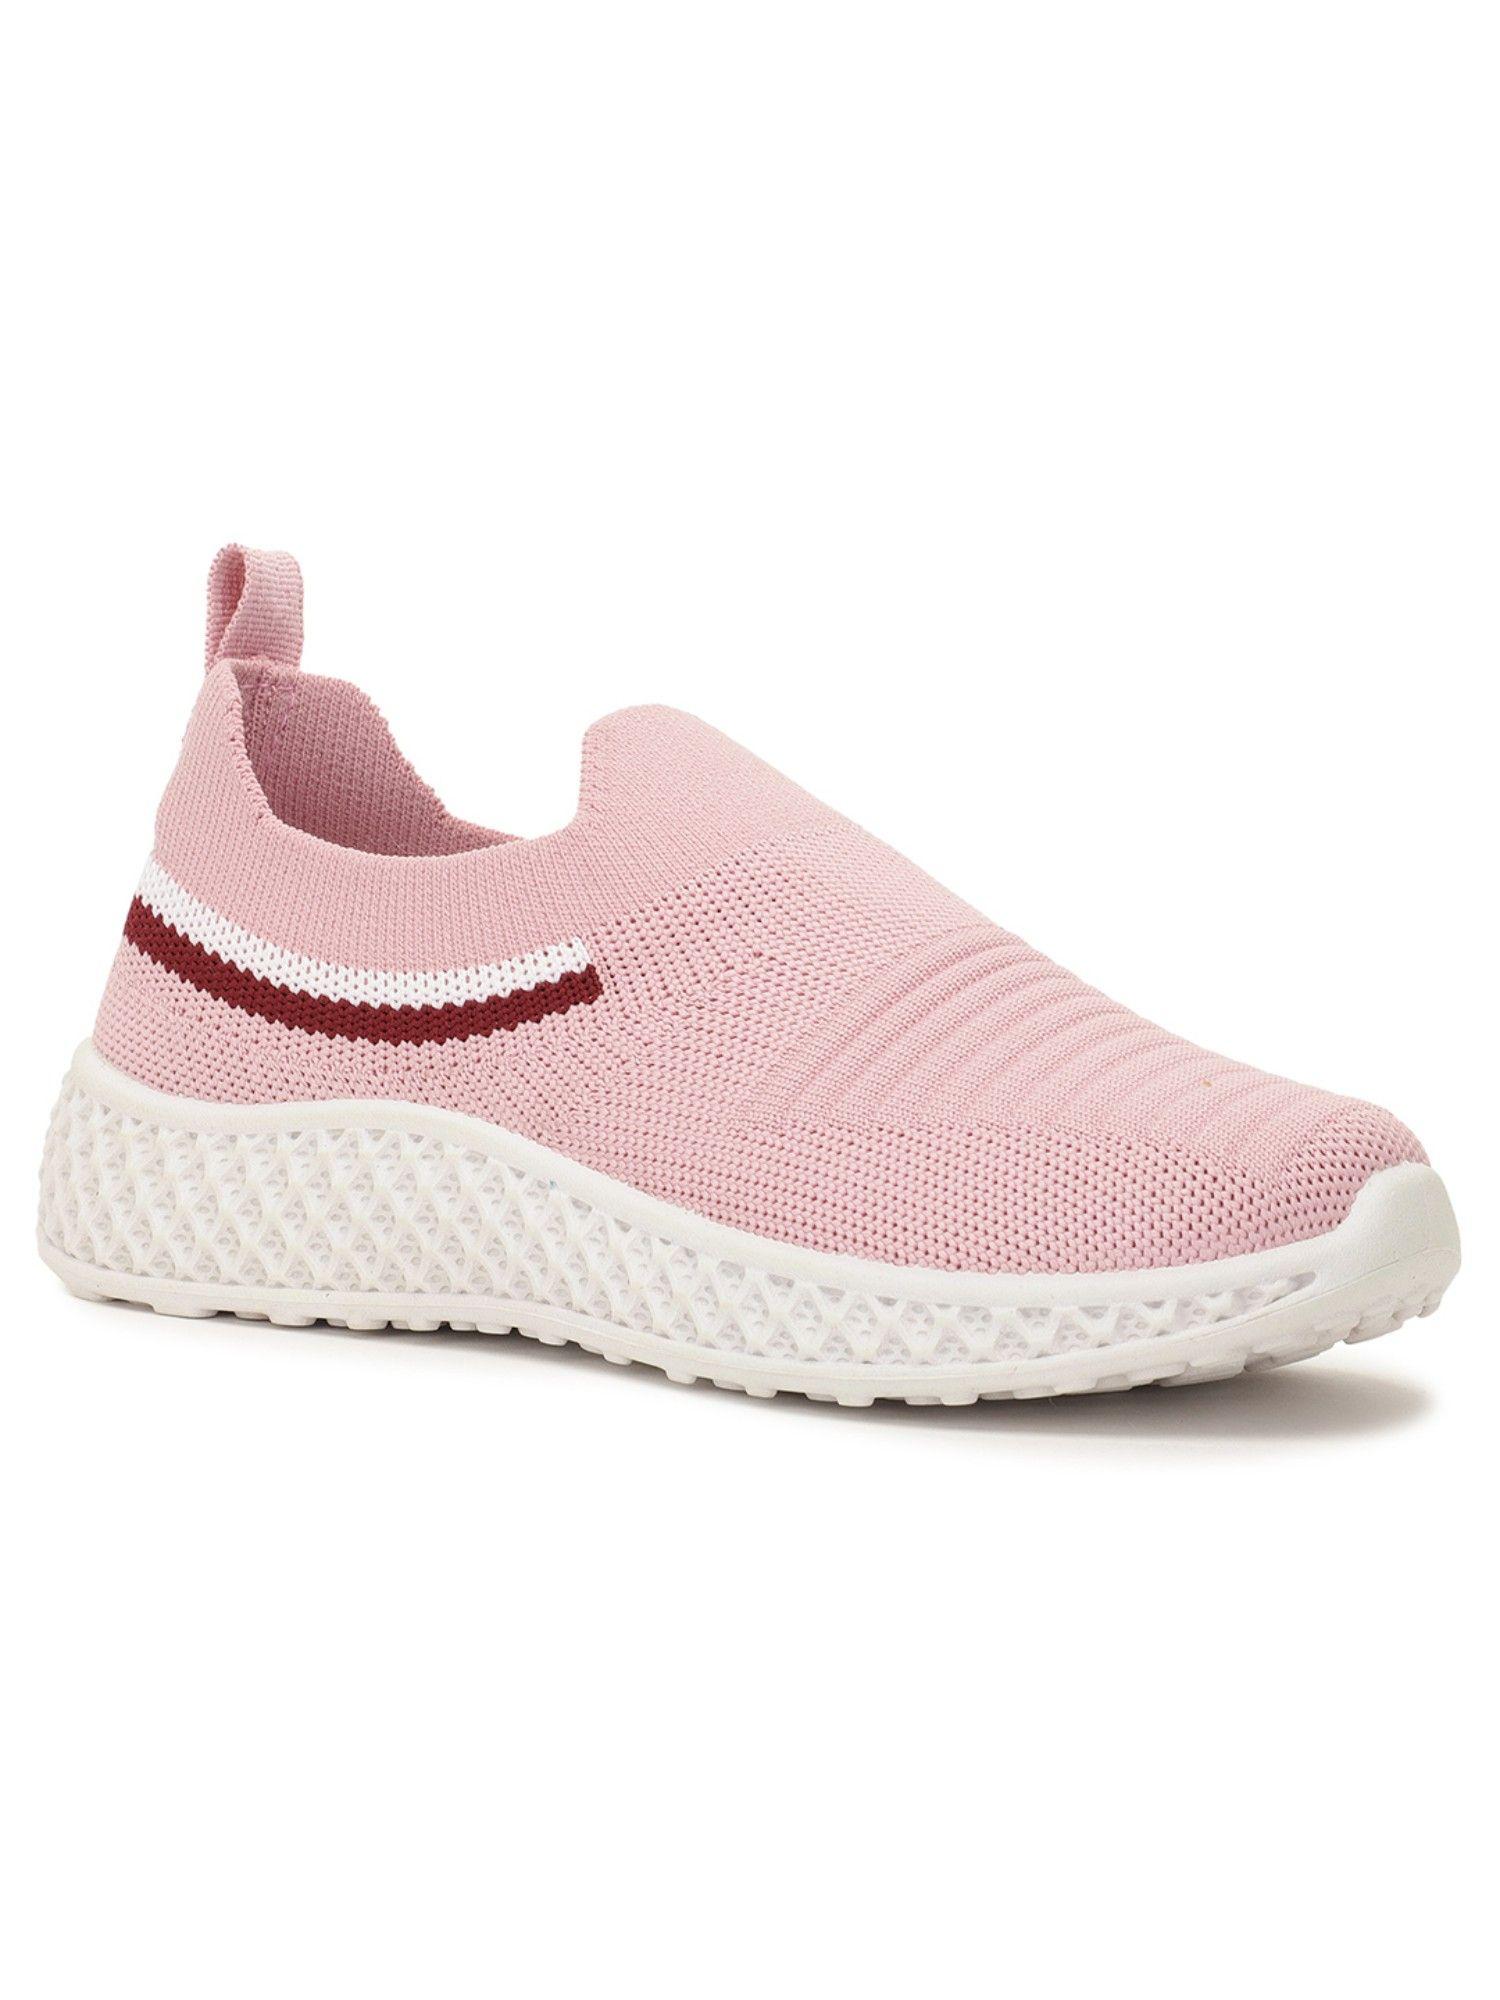 girls-slip-on-casual-shoes-pink